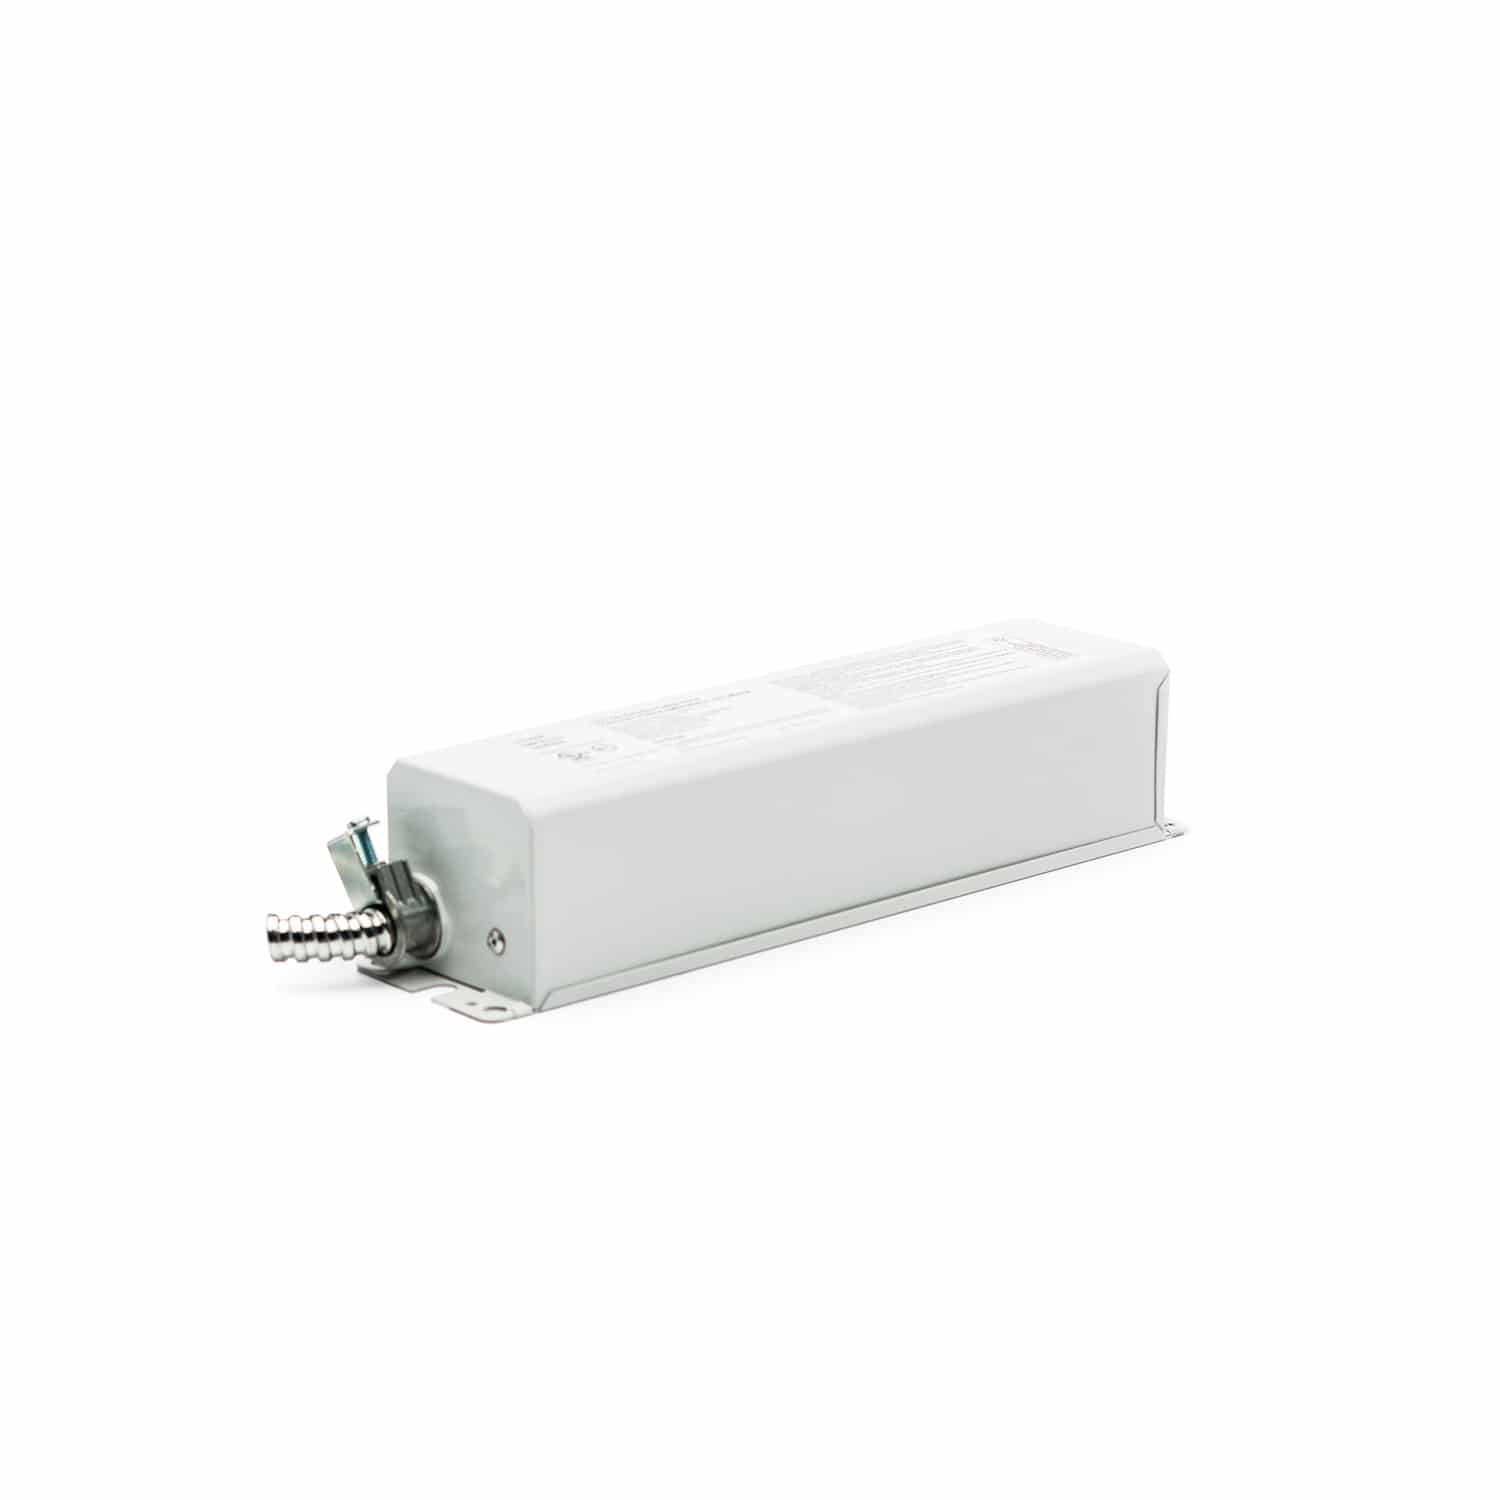 Energy Efficient, Emergency LED Driver that meets California Title 20 requirements and is Class 2 compliant. The Isolite EMP.